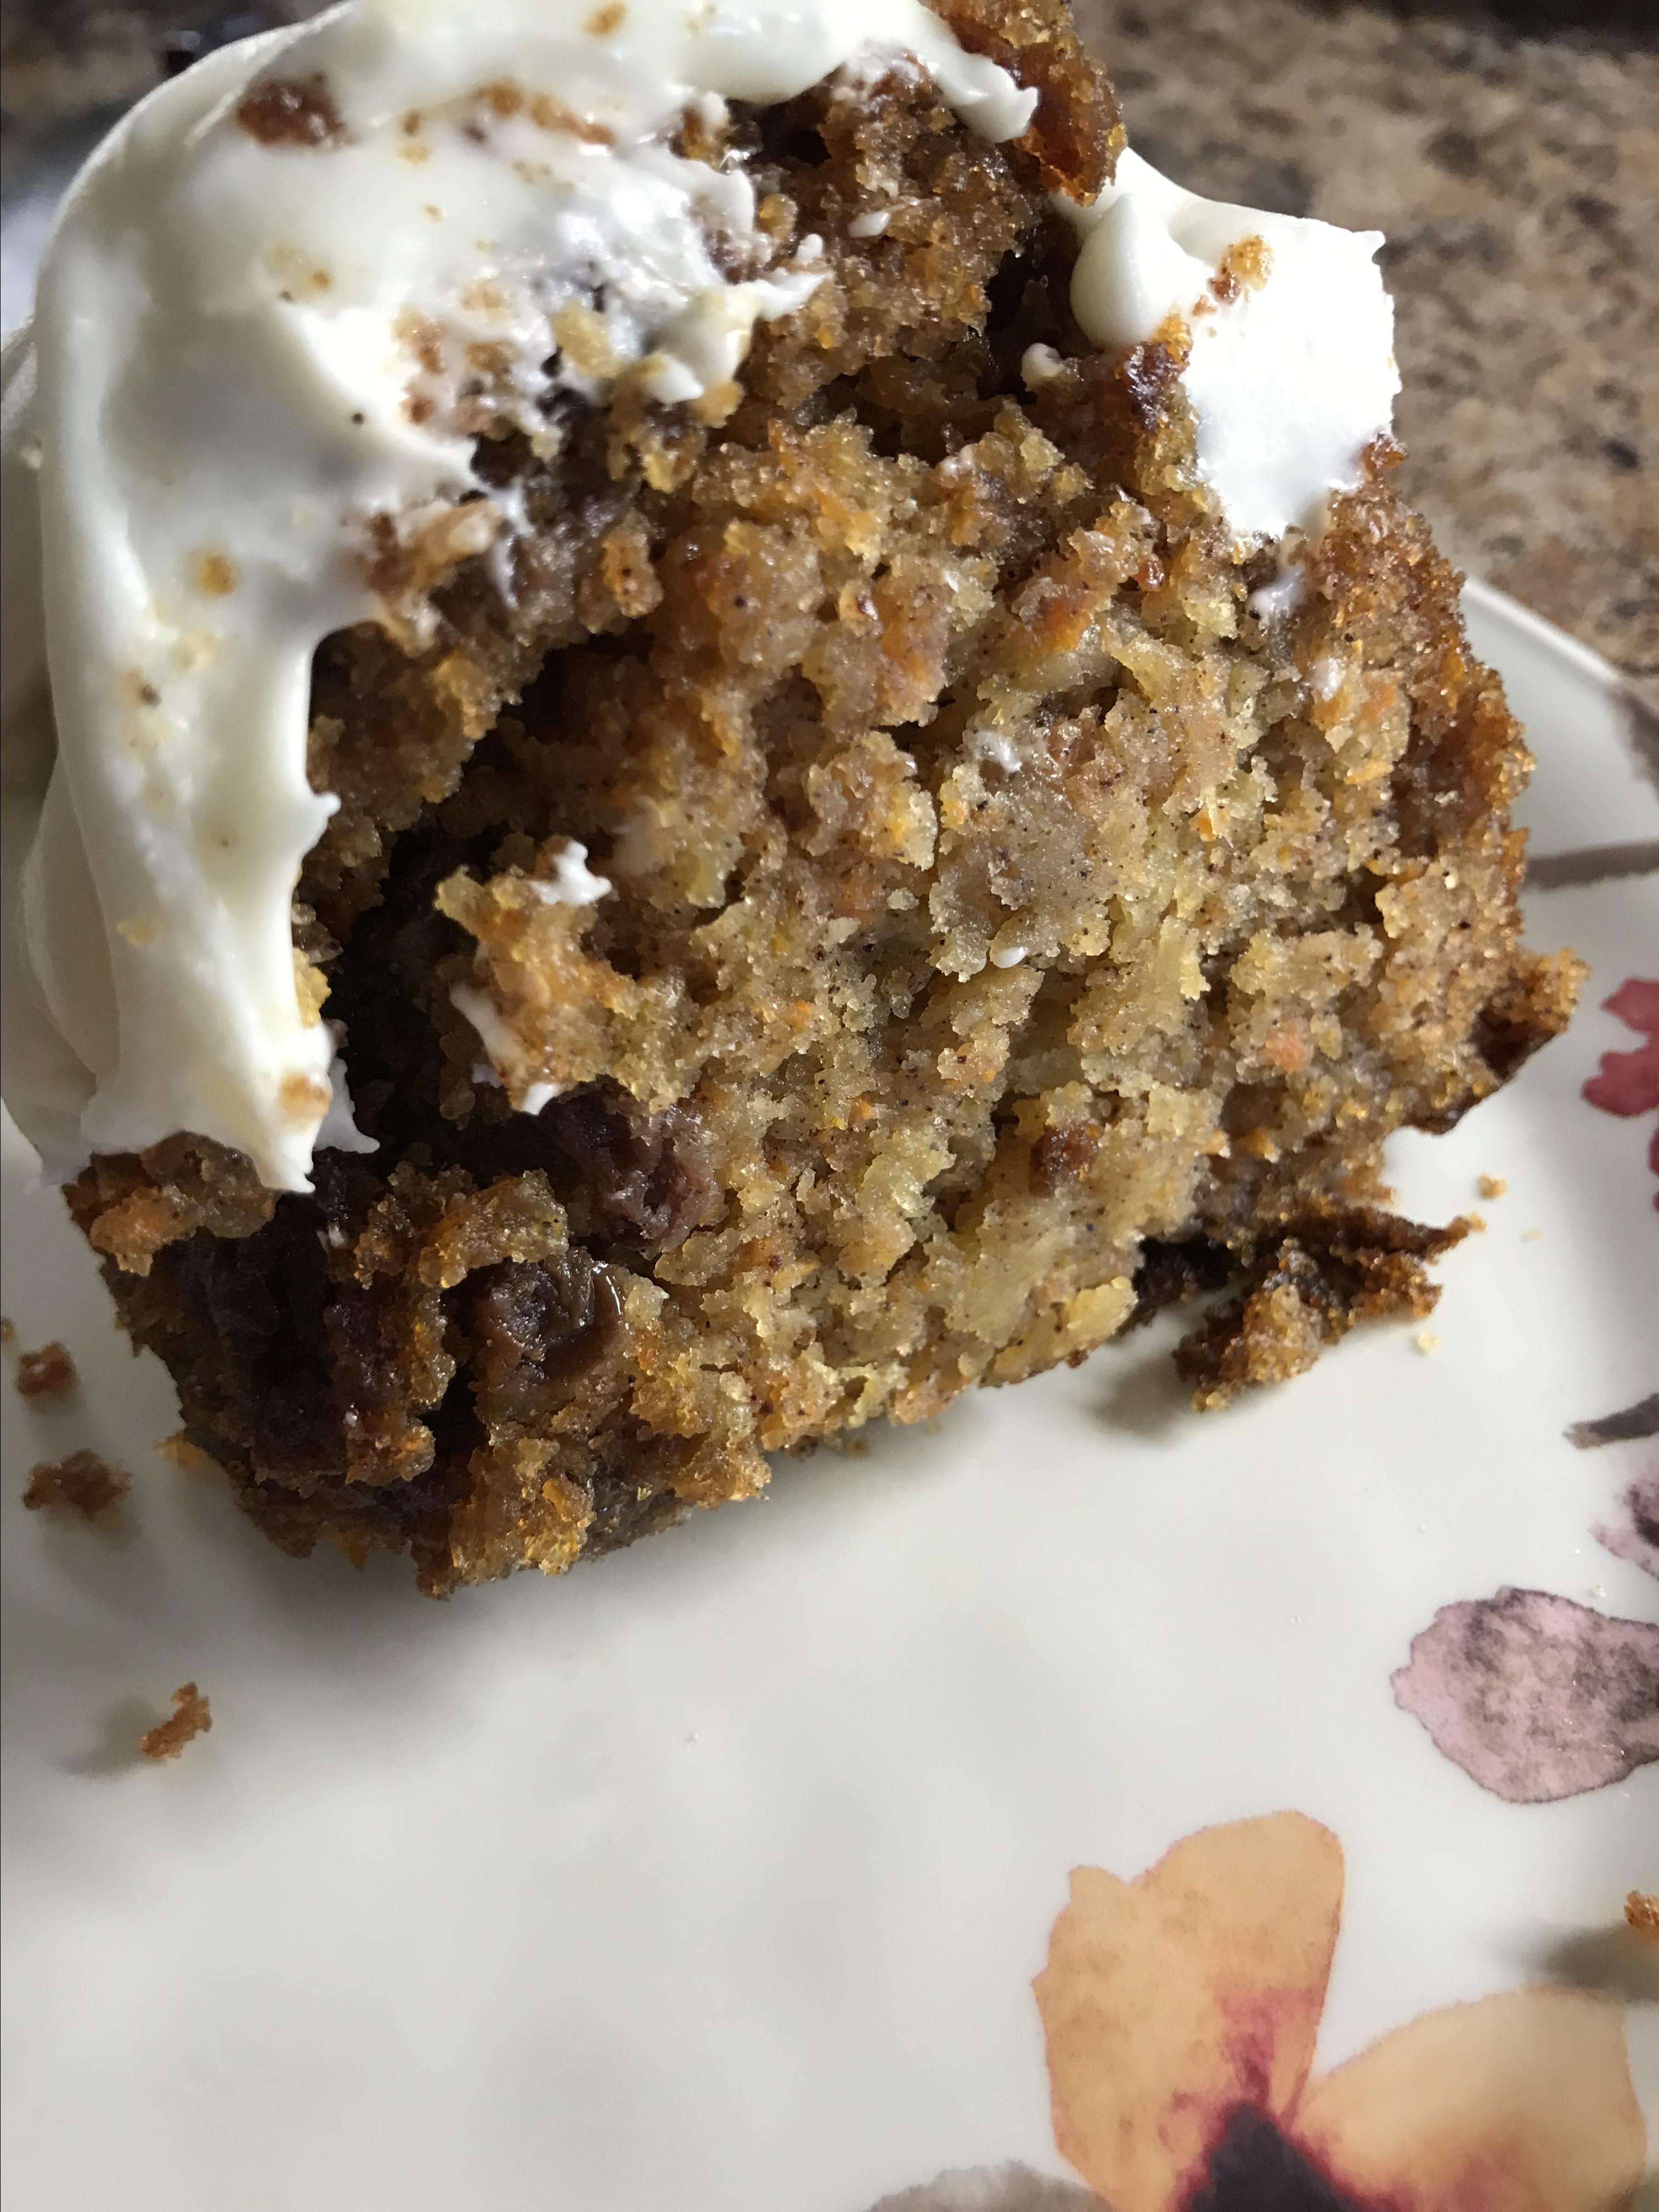 Carrot Cake with Cream Cheese Icing from Egg Farmers of Ontario Heather